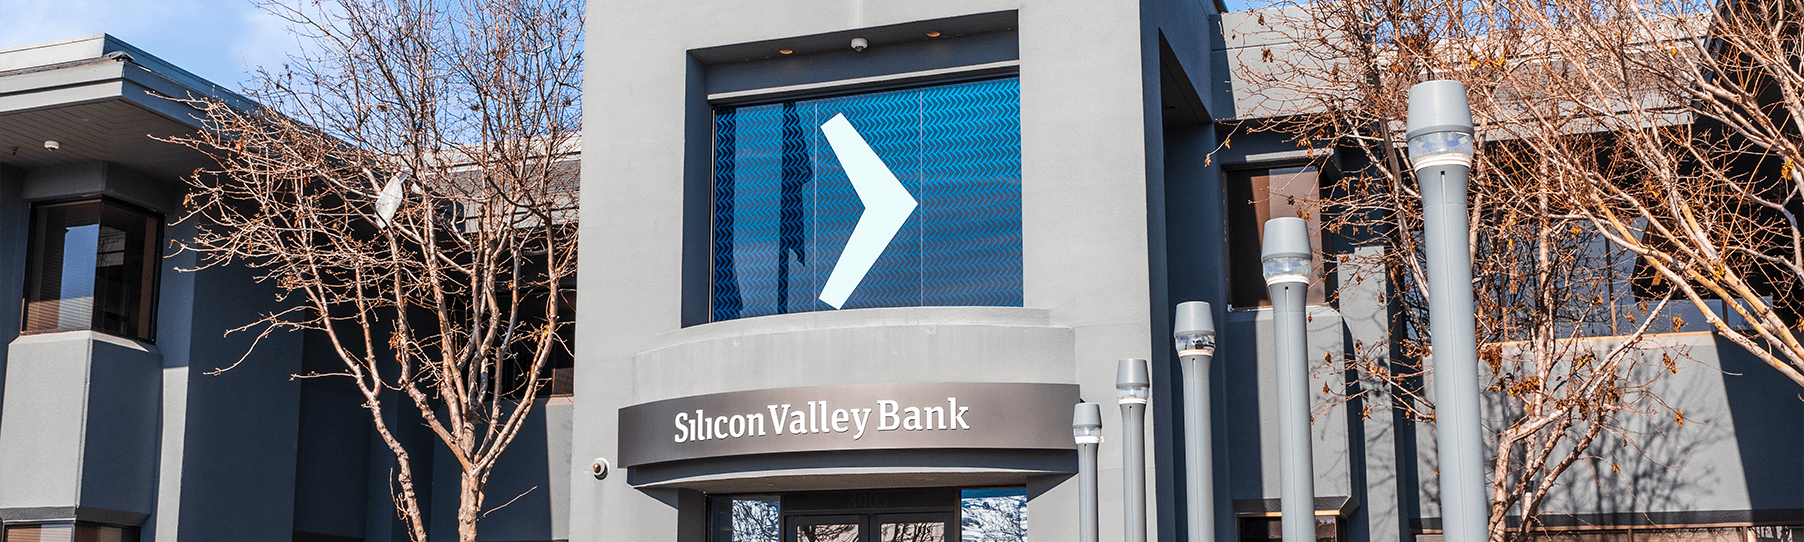 Silicon Valley Bank headquarters and branch.